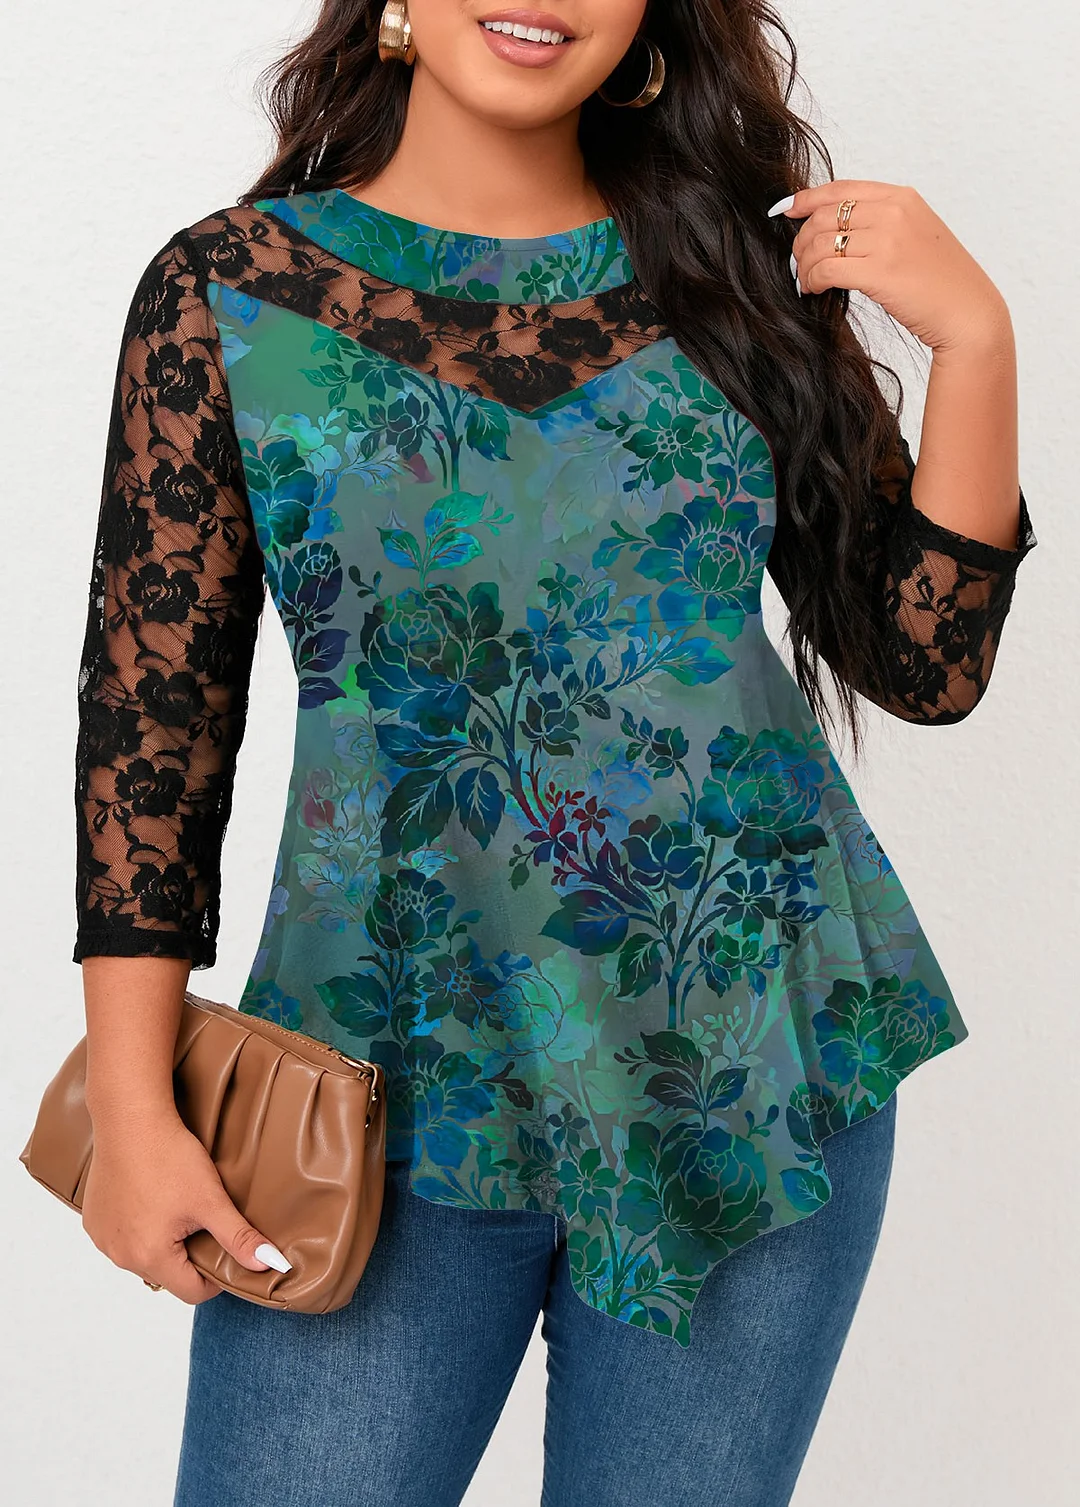 Style & Comfort for Mature Women Women's Casual Top, Plus Size Floral Print Lace Three Quarter Sleeve Round Neck Asymmetric Hem Top